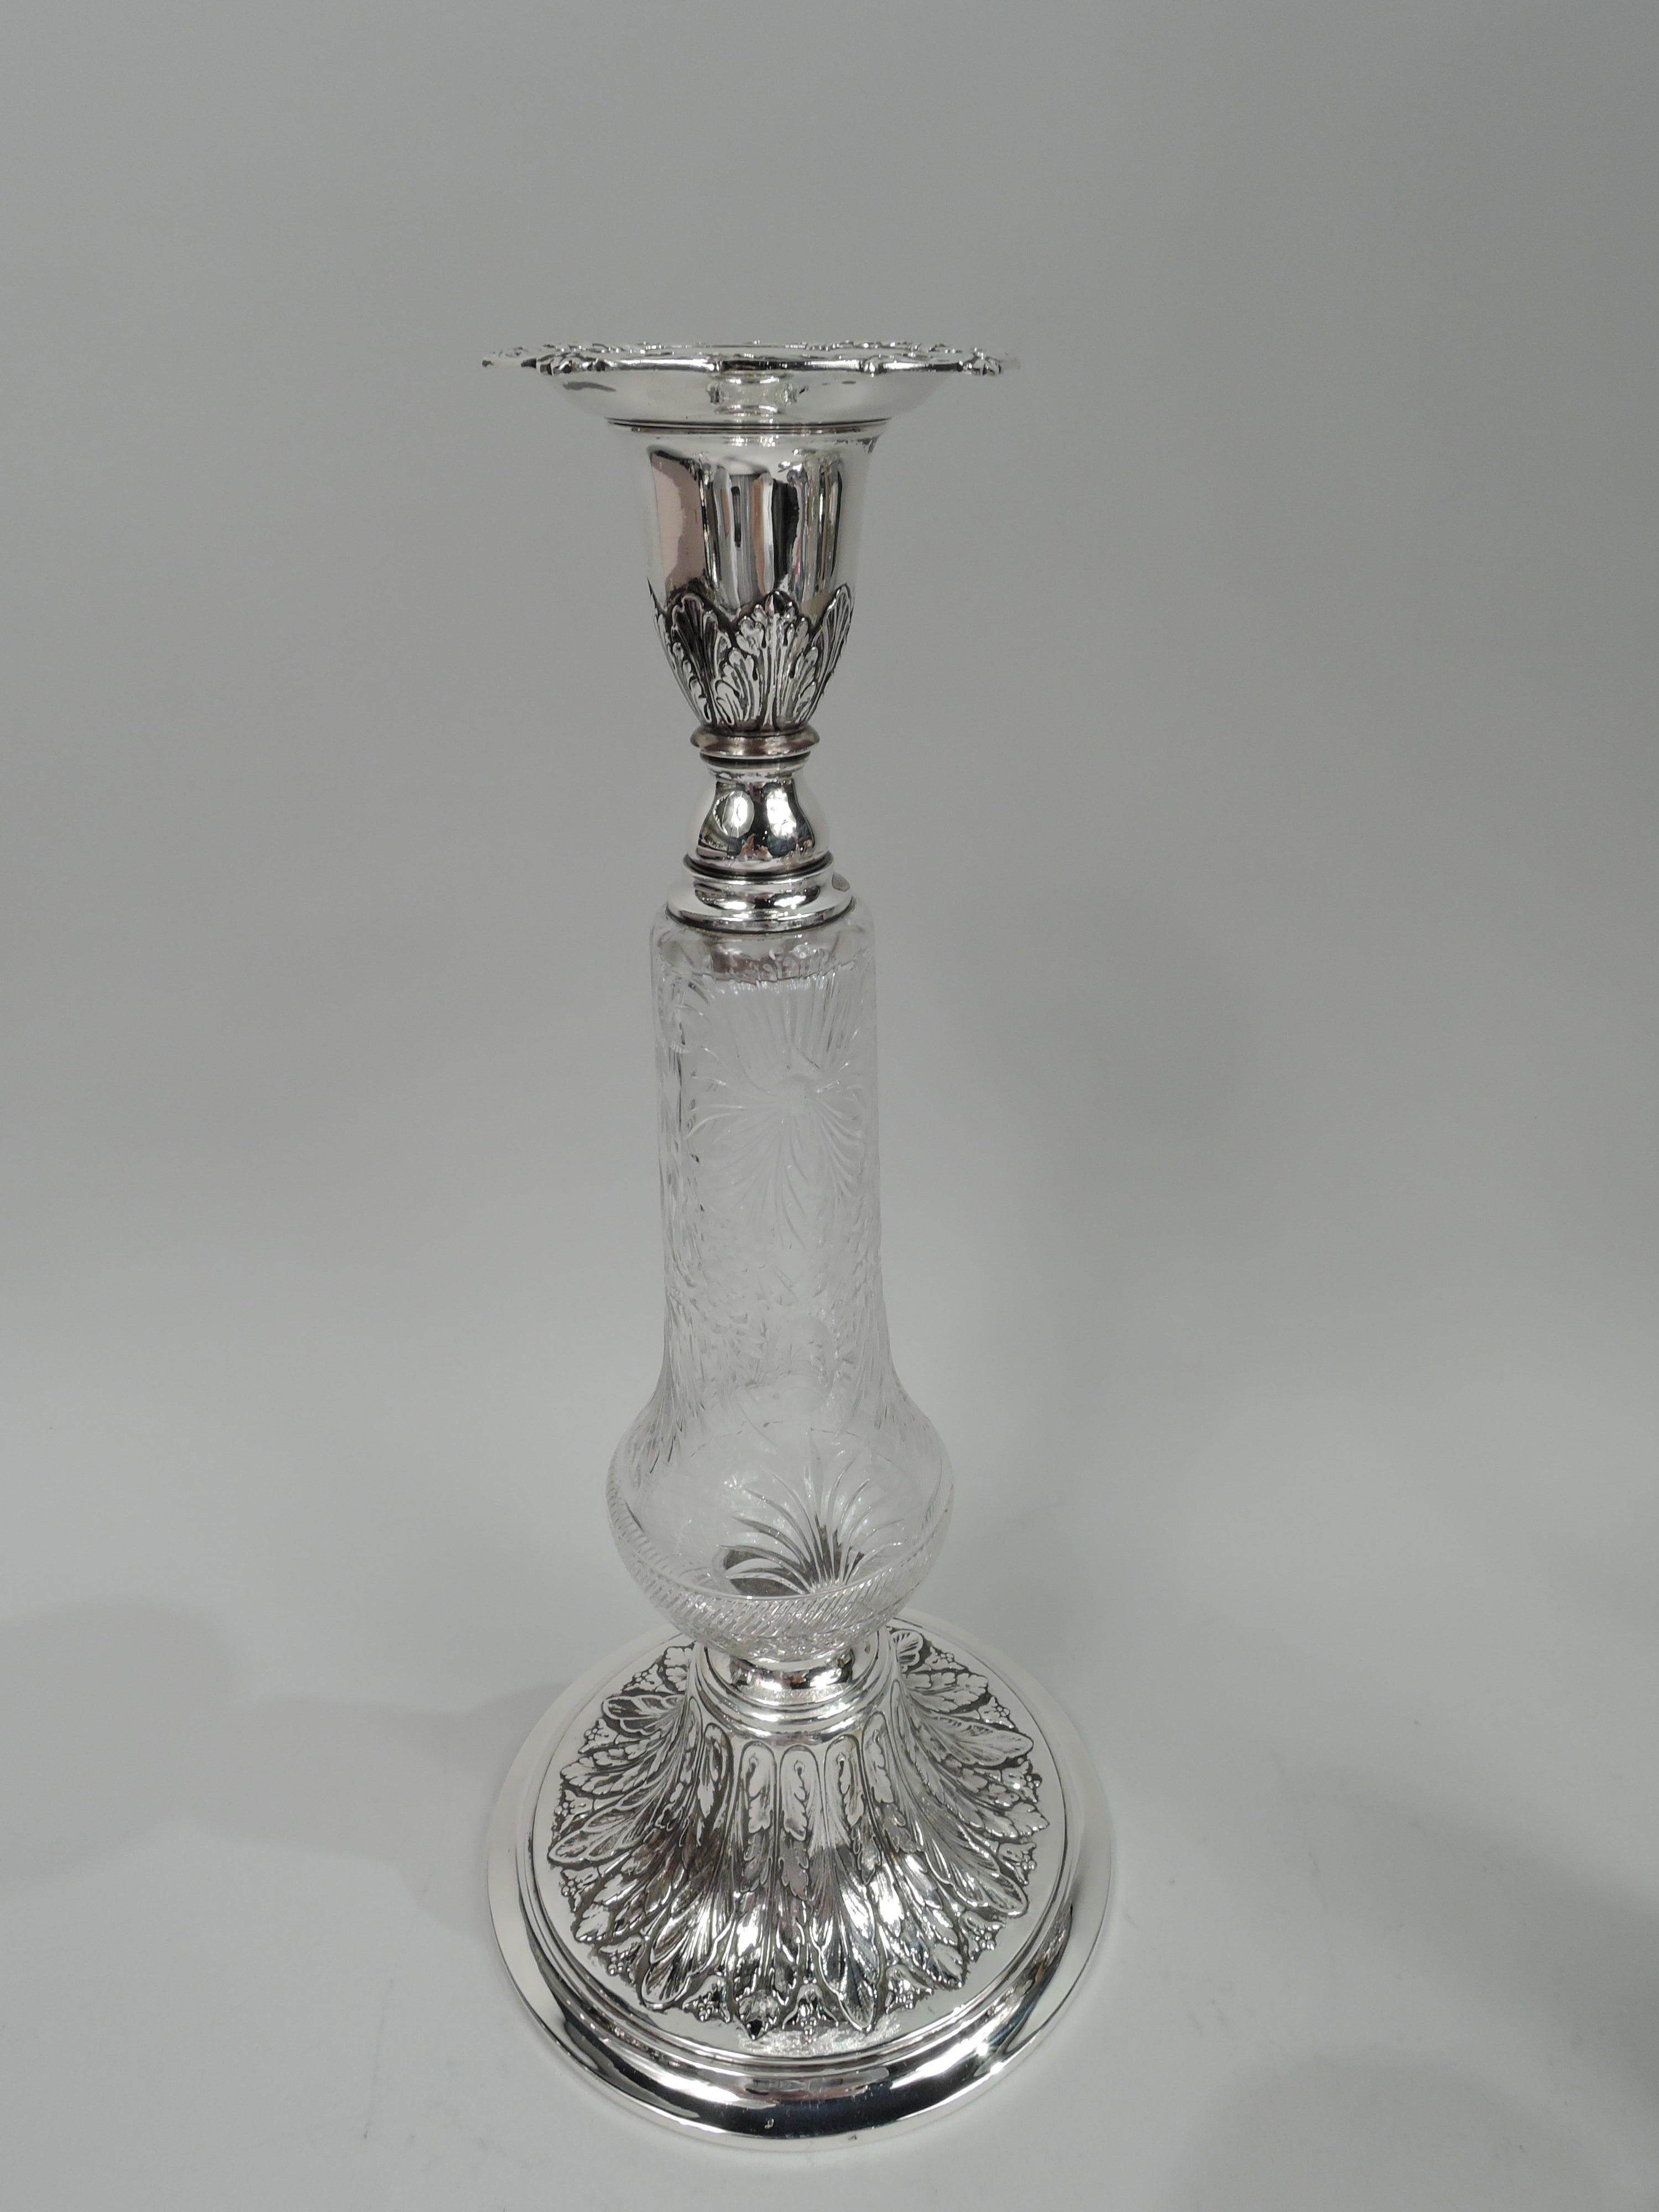 Pair of Edwardian classical candlesticks. Made by Gorham in Providence in 1929. Crystal baluster shaft with flowers, leaves, and diaper. Sterling silver socket with acanthus leaf ornament; detachable bobeche with scroll and imbricated leaf border.